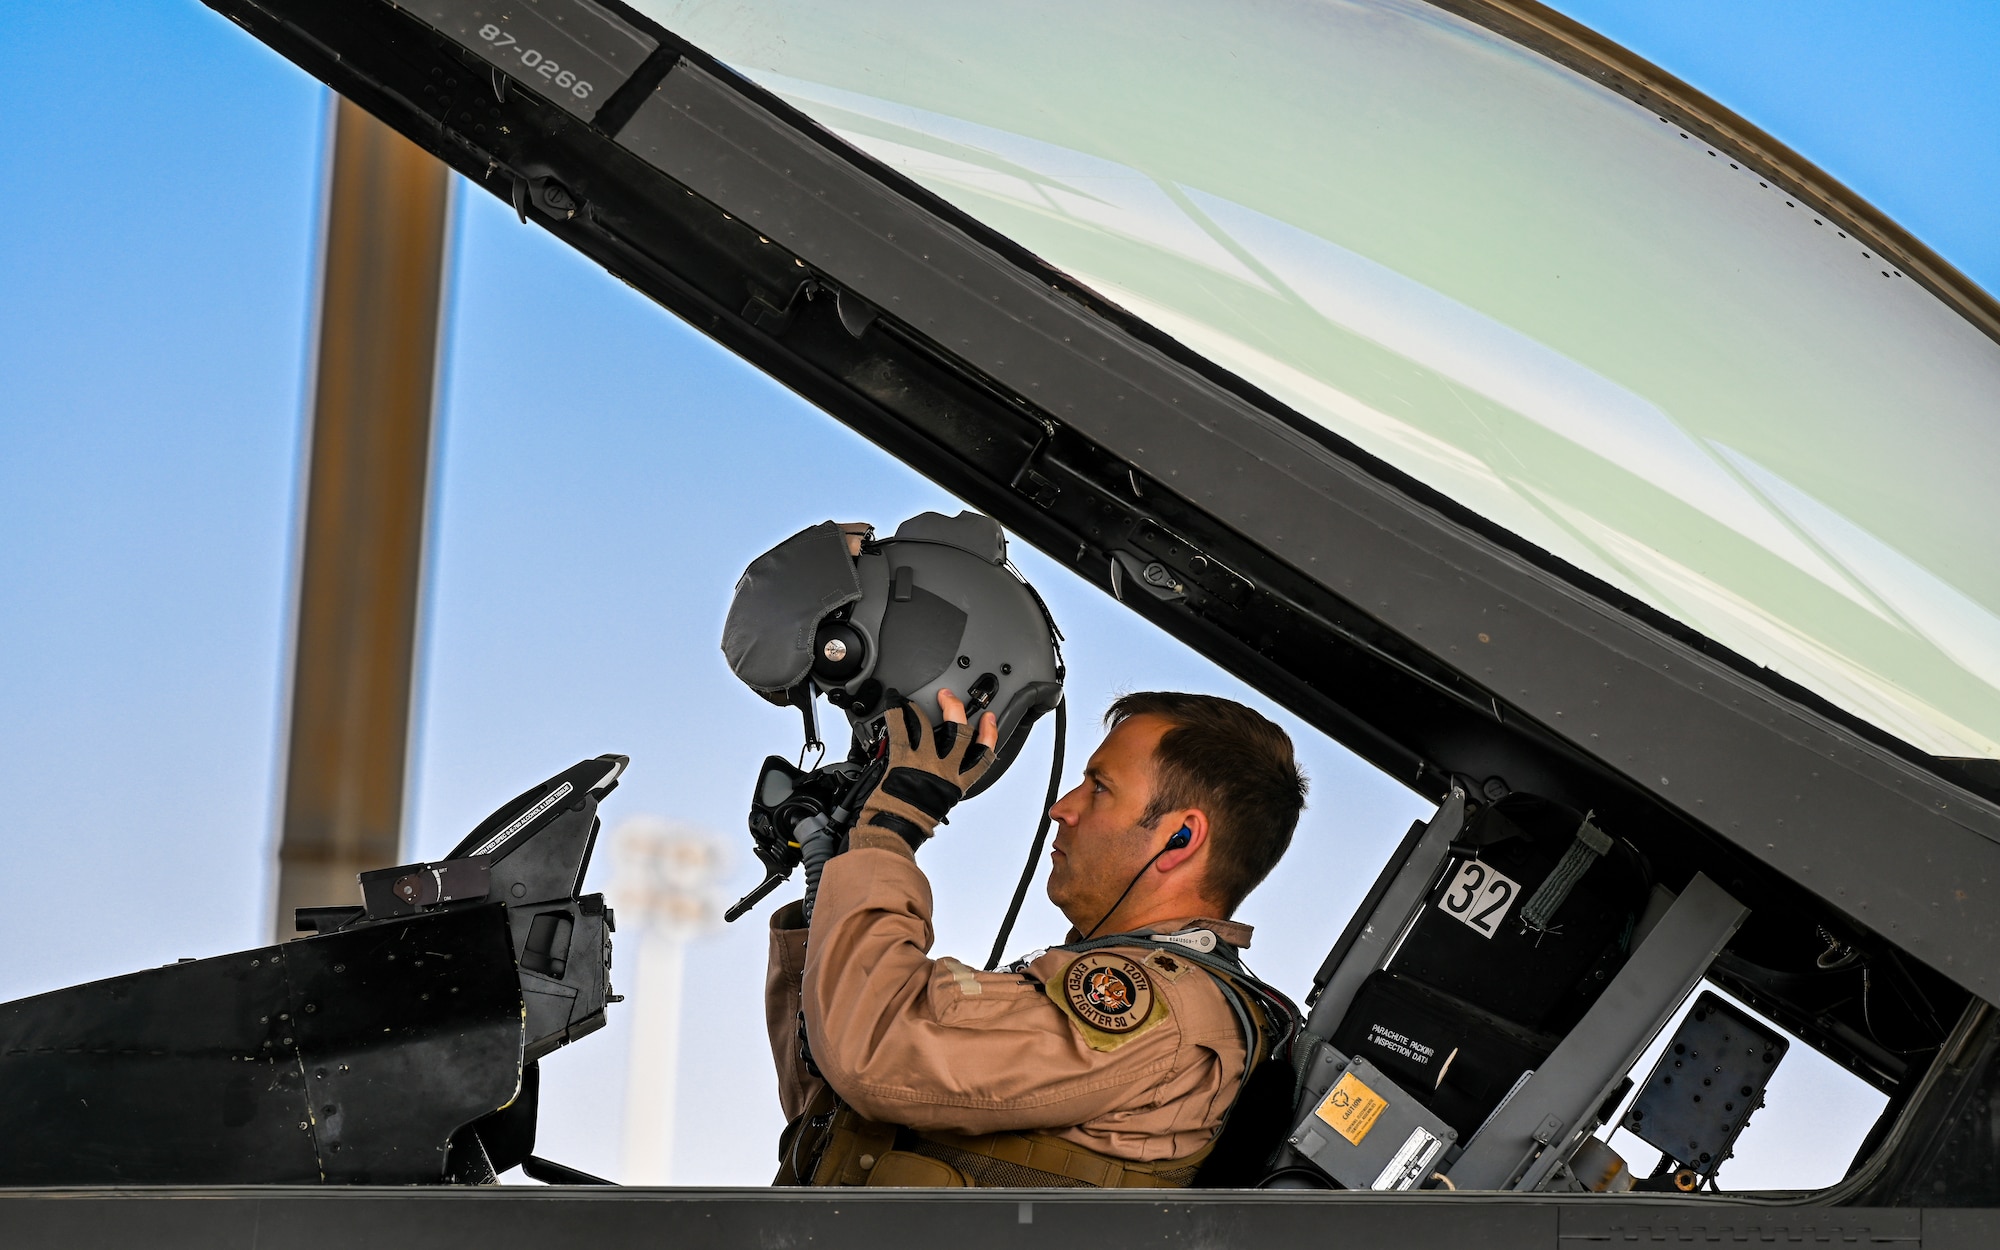 A 176th Expeditionary Fighter Squadron pilot dons his helmet in the cockpit of an F-16 Fighting Falcon in preparation for take off at King Abdulaziz Air Base, Kingdom of Saudi Arabia, Feb. 17, 2022. The ability to work with other nations and move fluidly across the theater is key to ensuring readiness. (U.S. Air Force photo by Staff Sgt. Christina A. Graves)